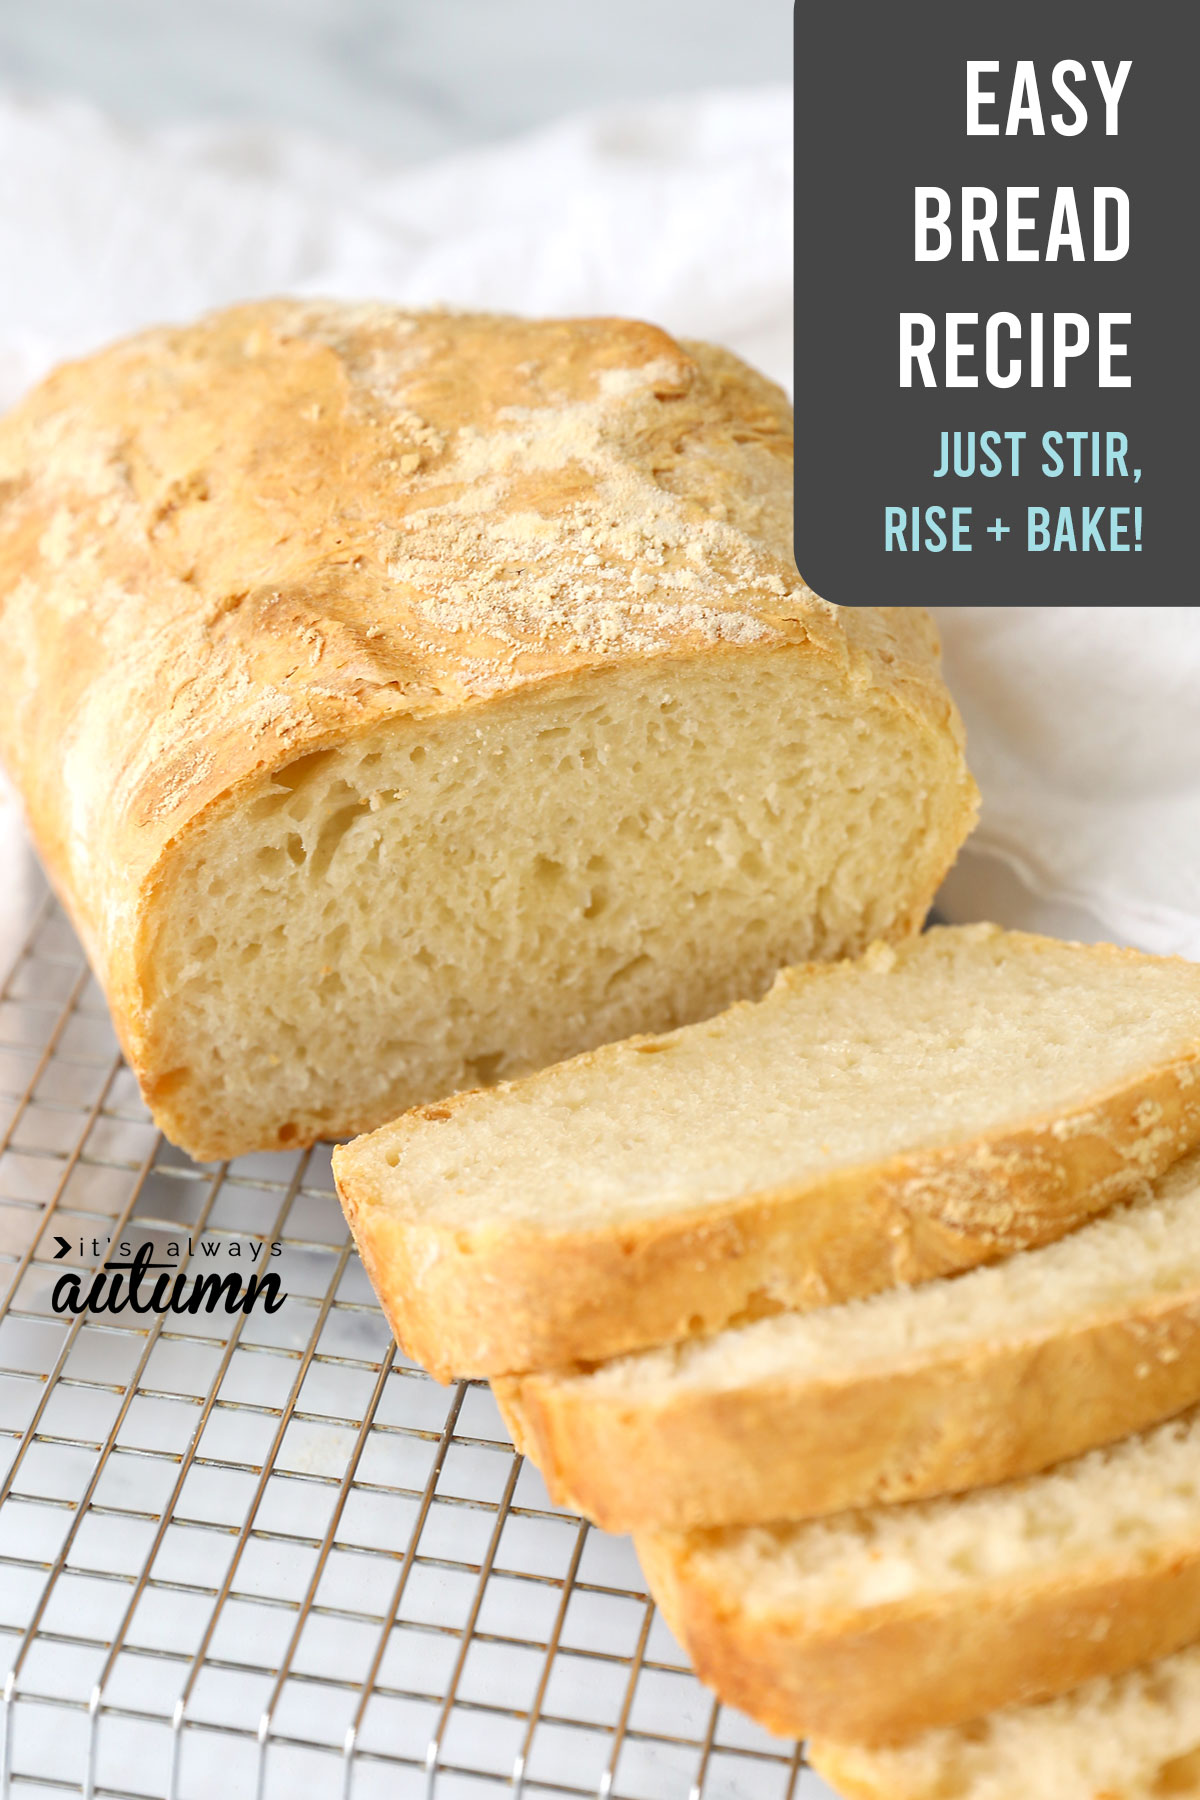 This easy bread recipe only require flour, salt, yeast, and water! All you have to do is stir, rise, and bake.